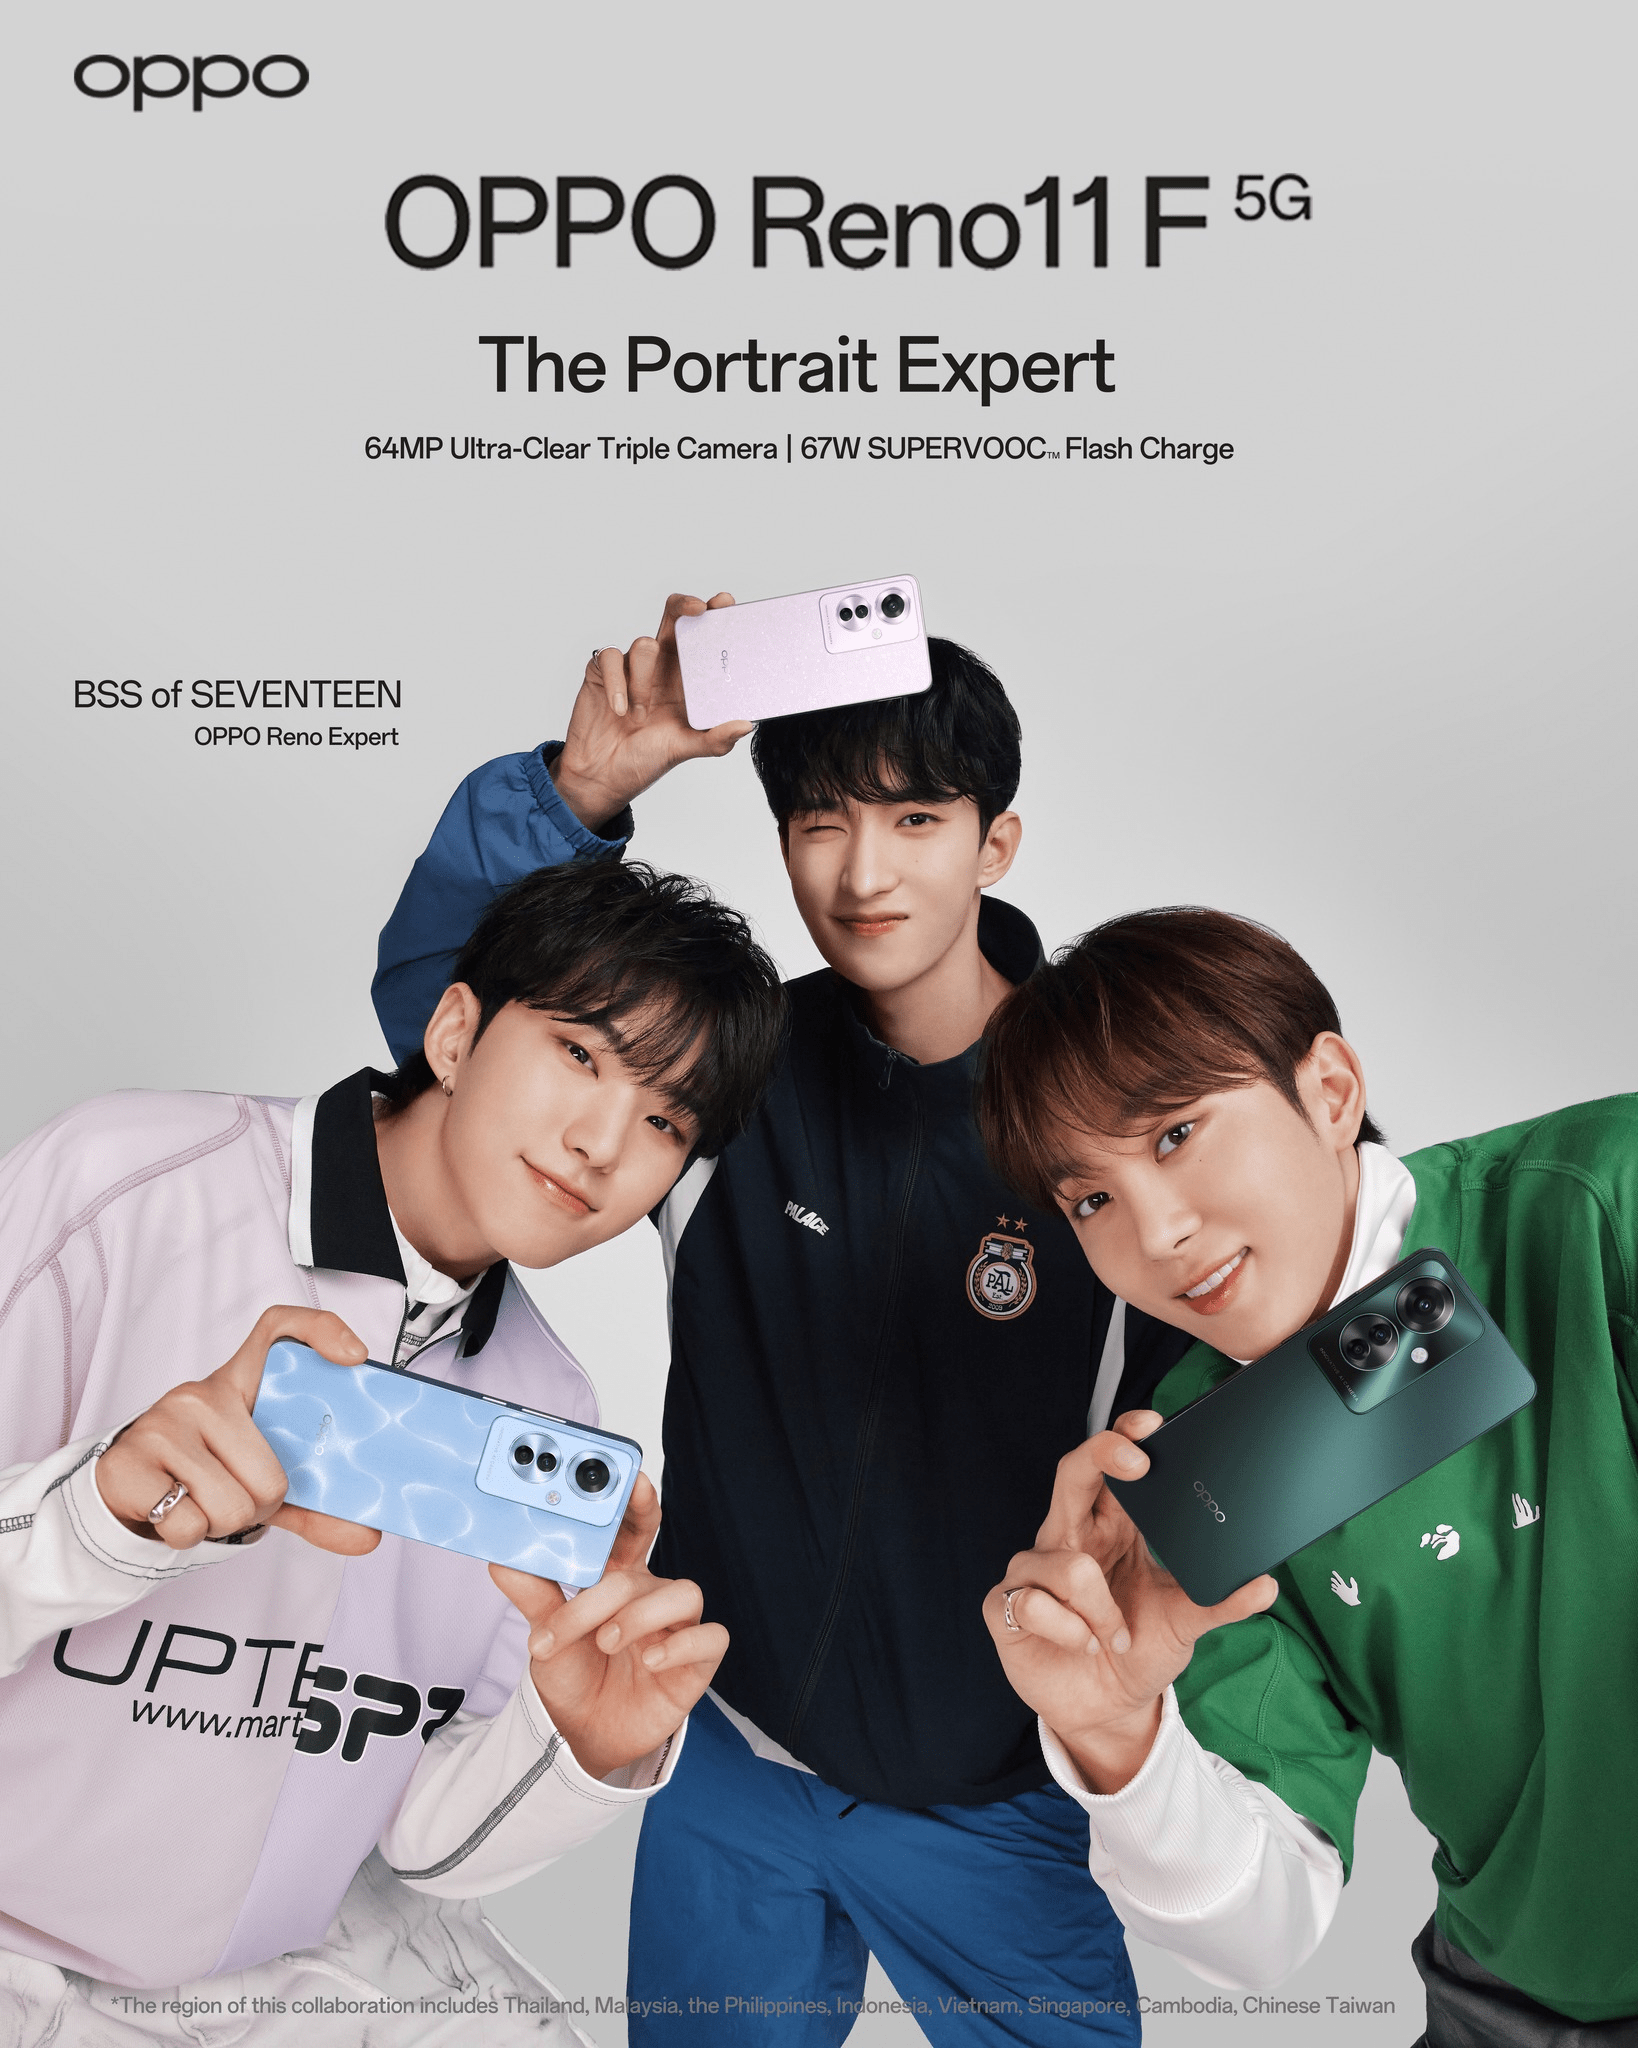 Calling all Carats! Get a BSS (SEVENTEEN) Postcard Set when you avail the OPPO Reno11 F 5G